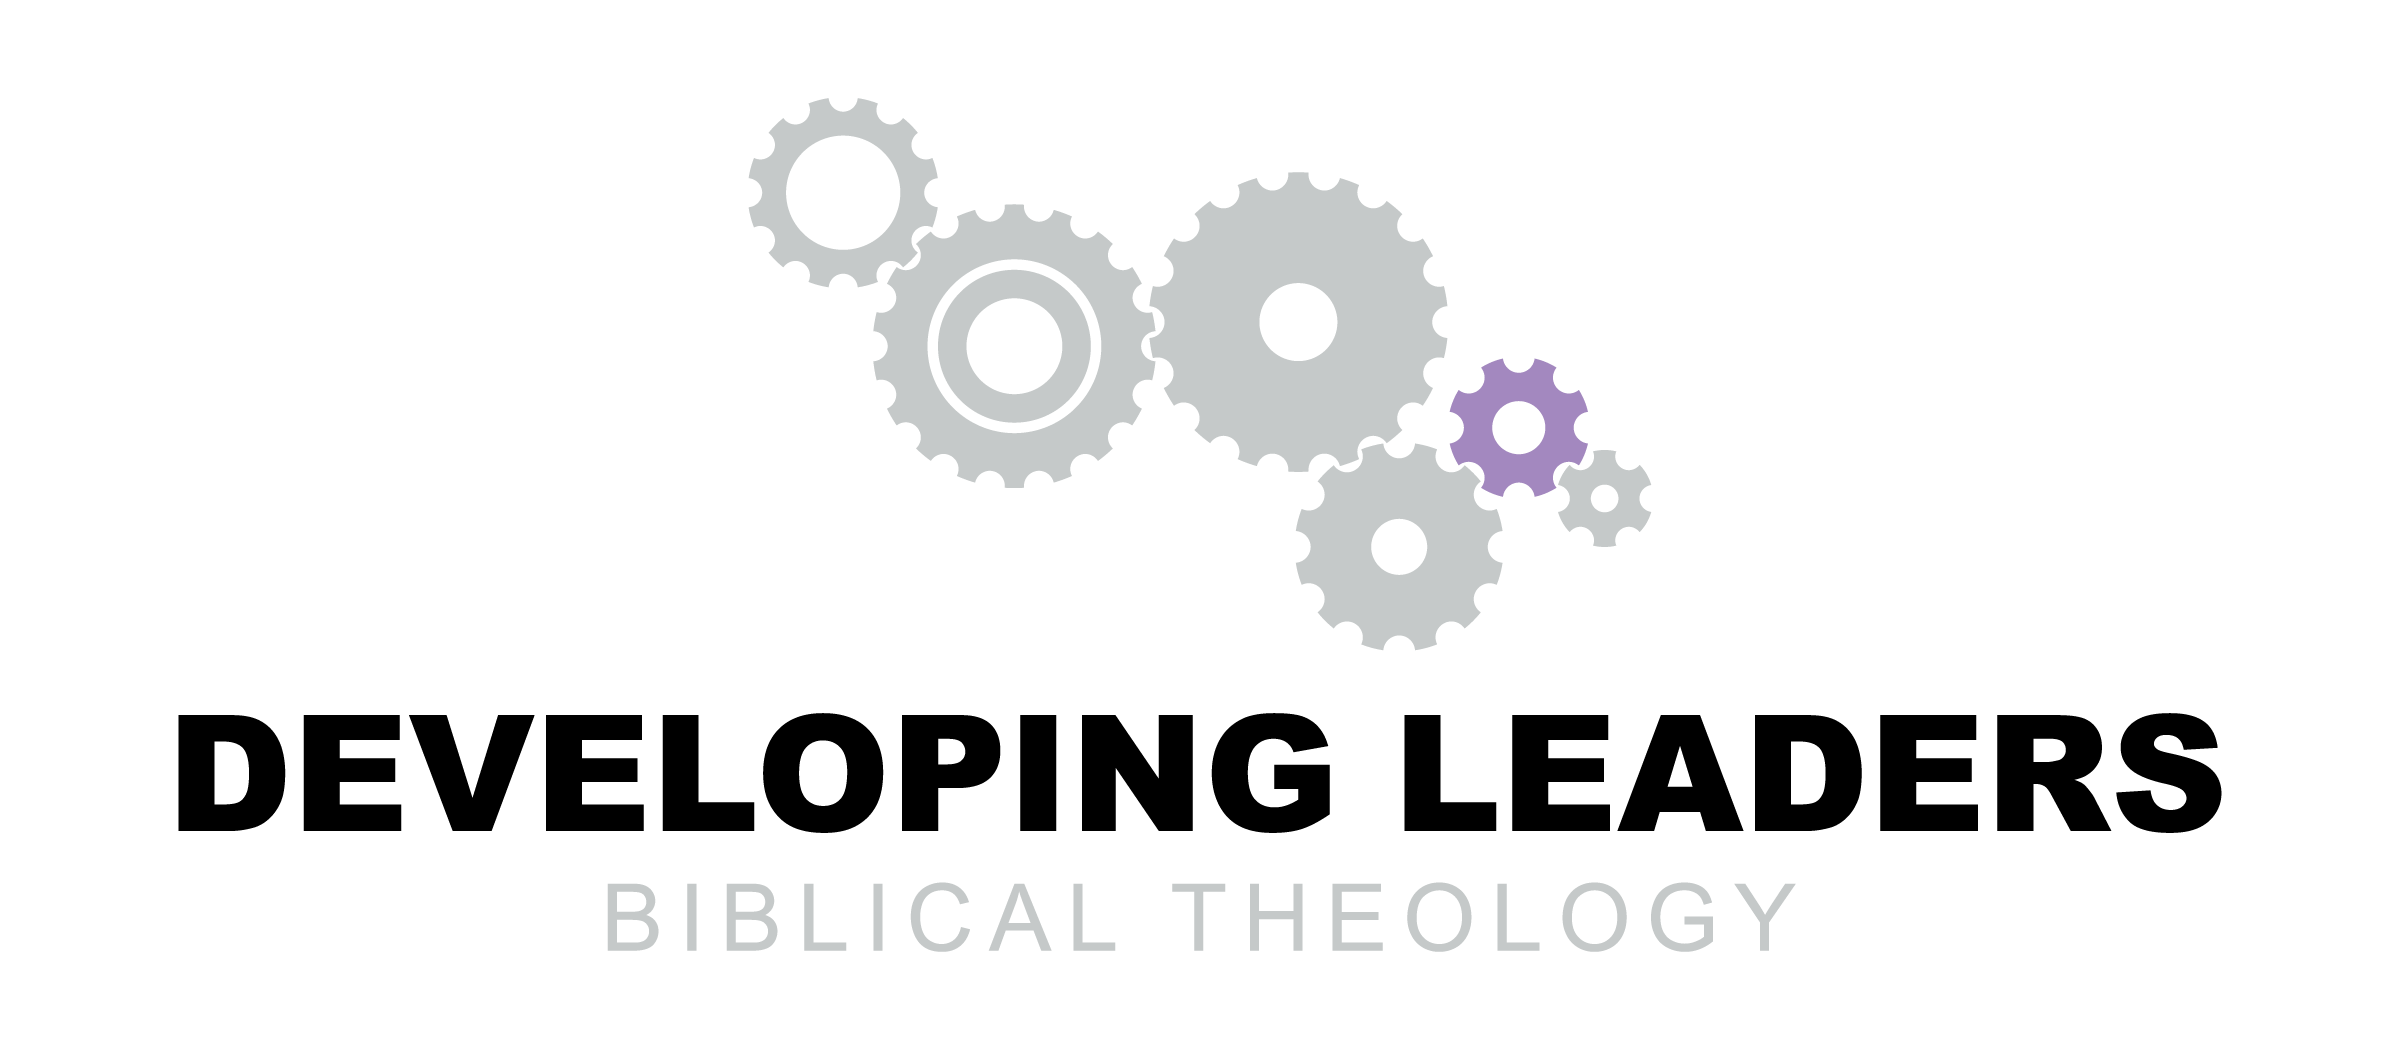 Developing Leaders Biblical Theology - 05 The Letters